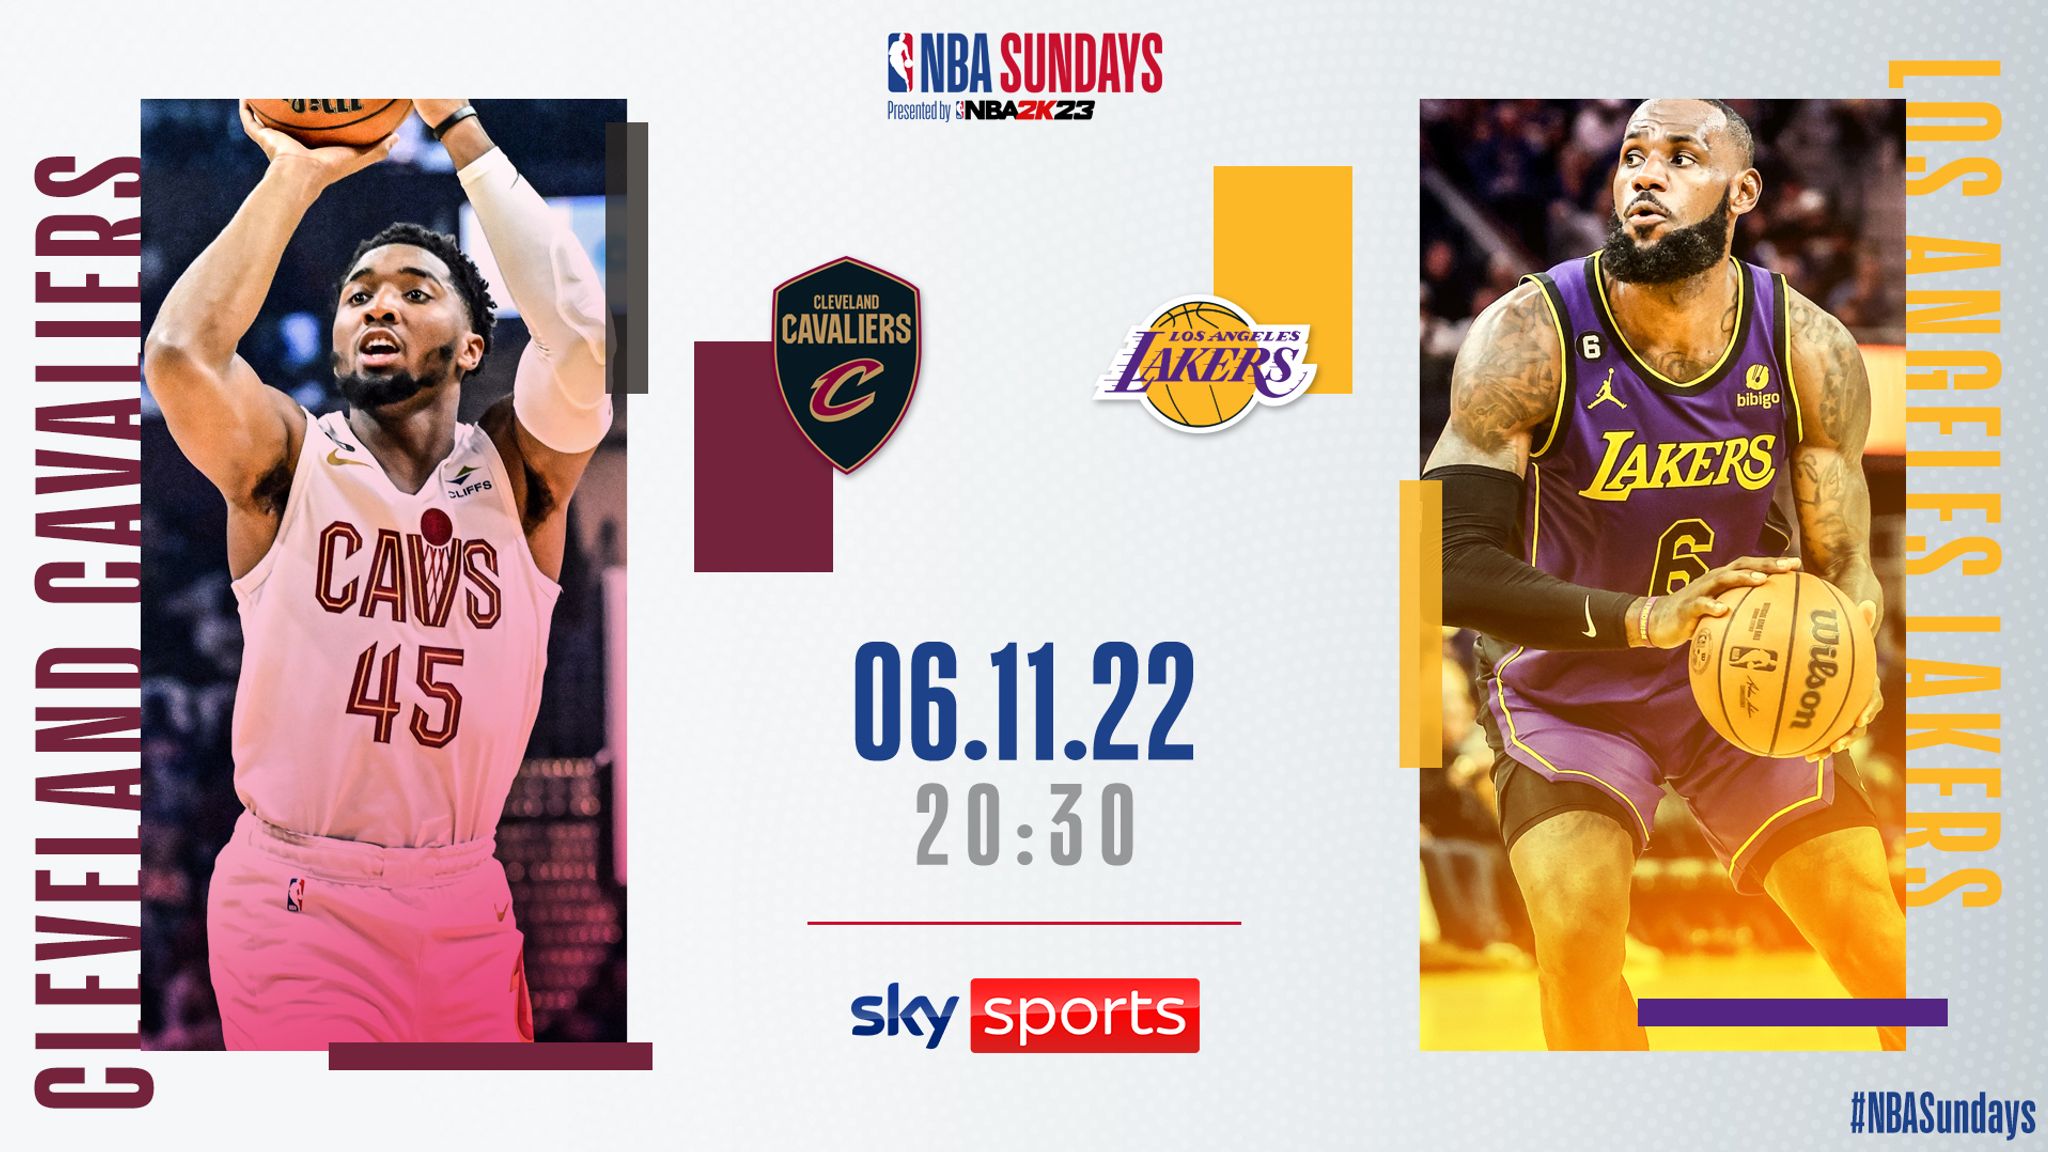 Cavaliers edge to win over Lakers